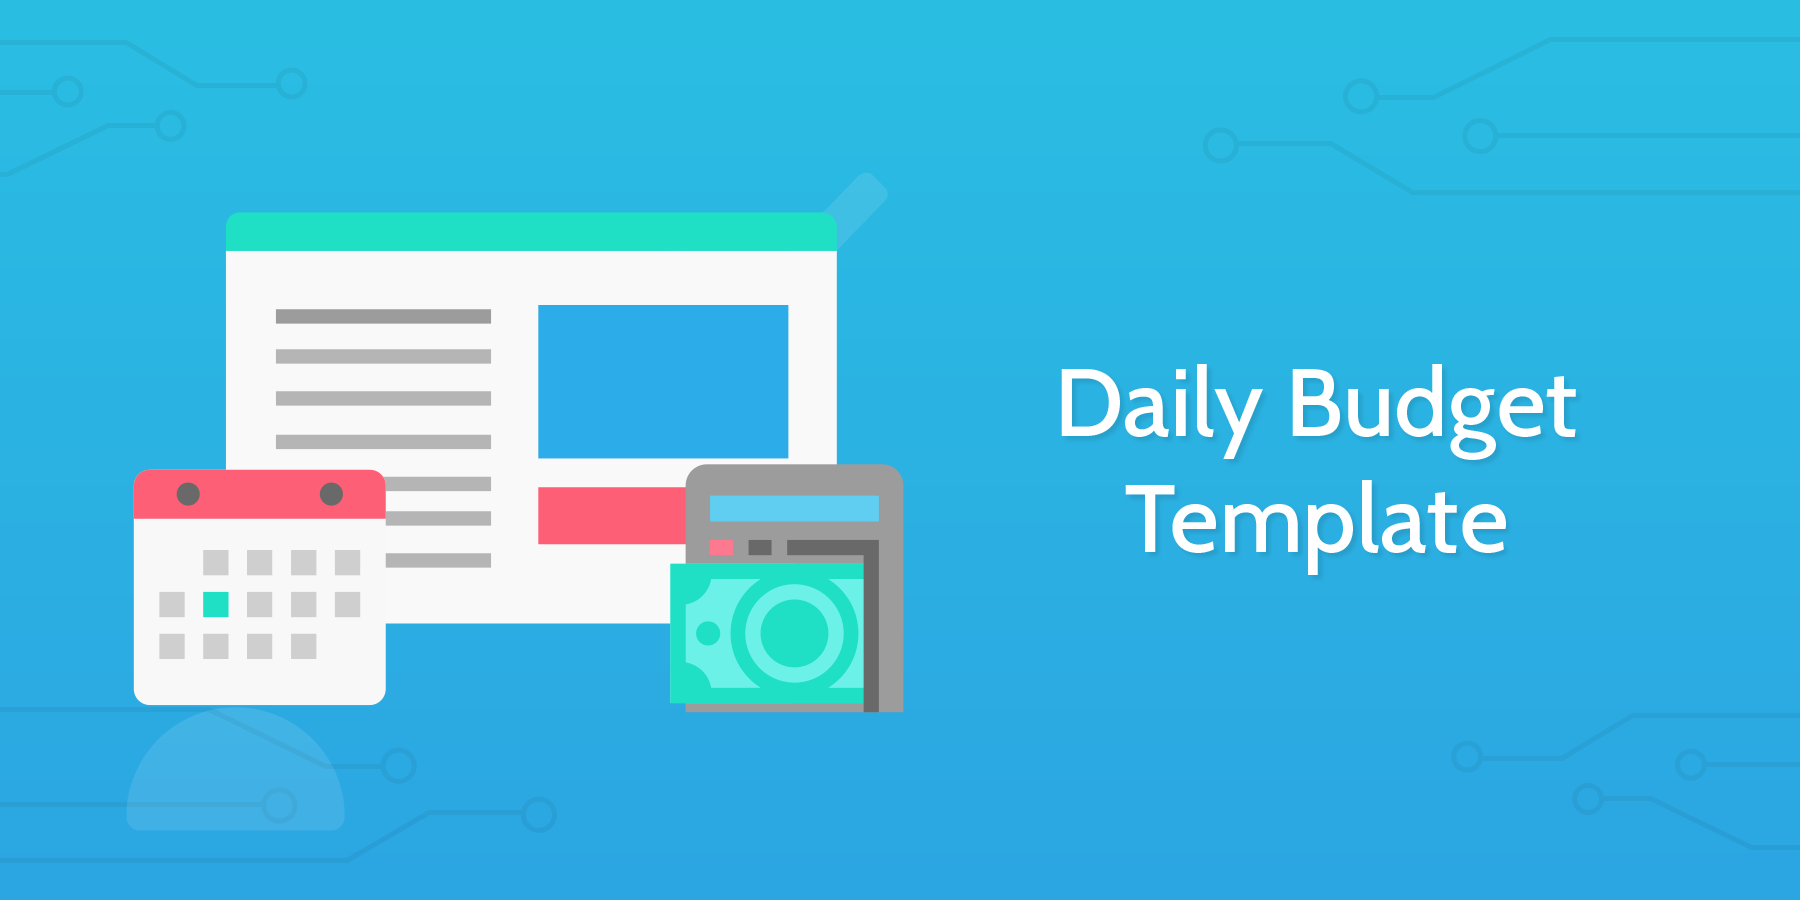 Daily Budget Template